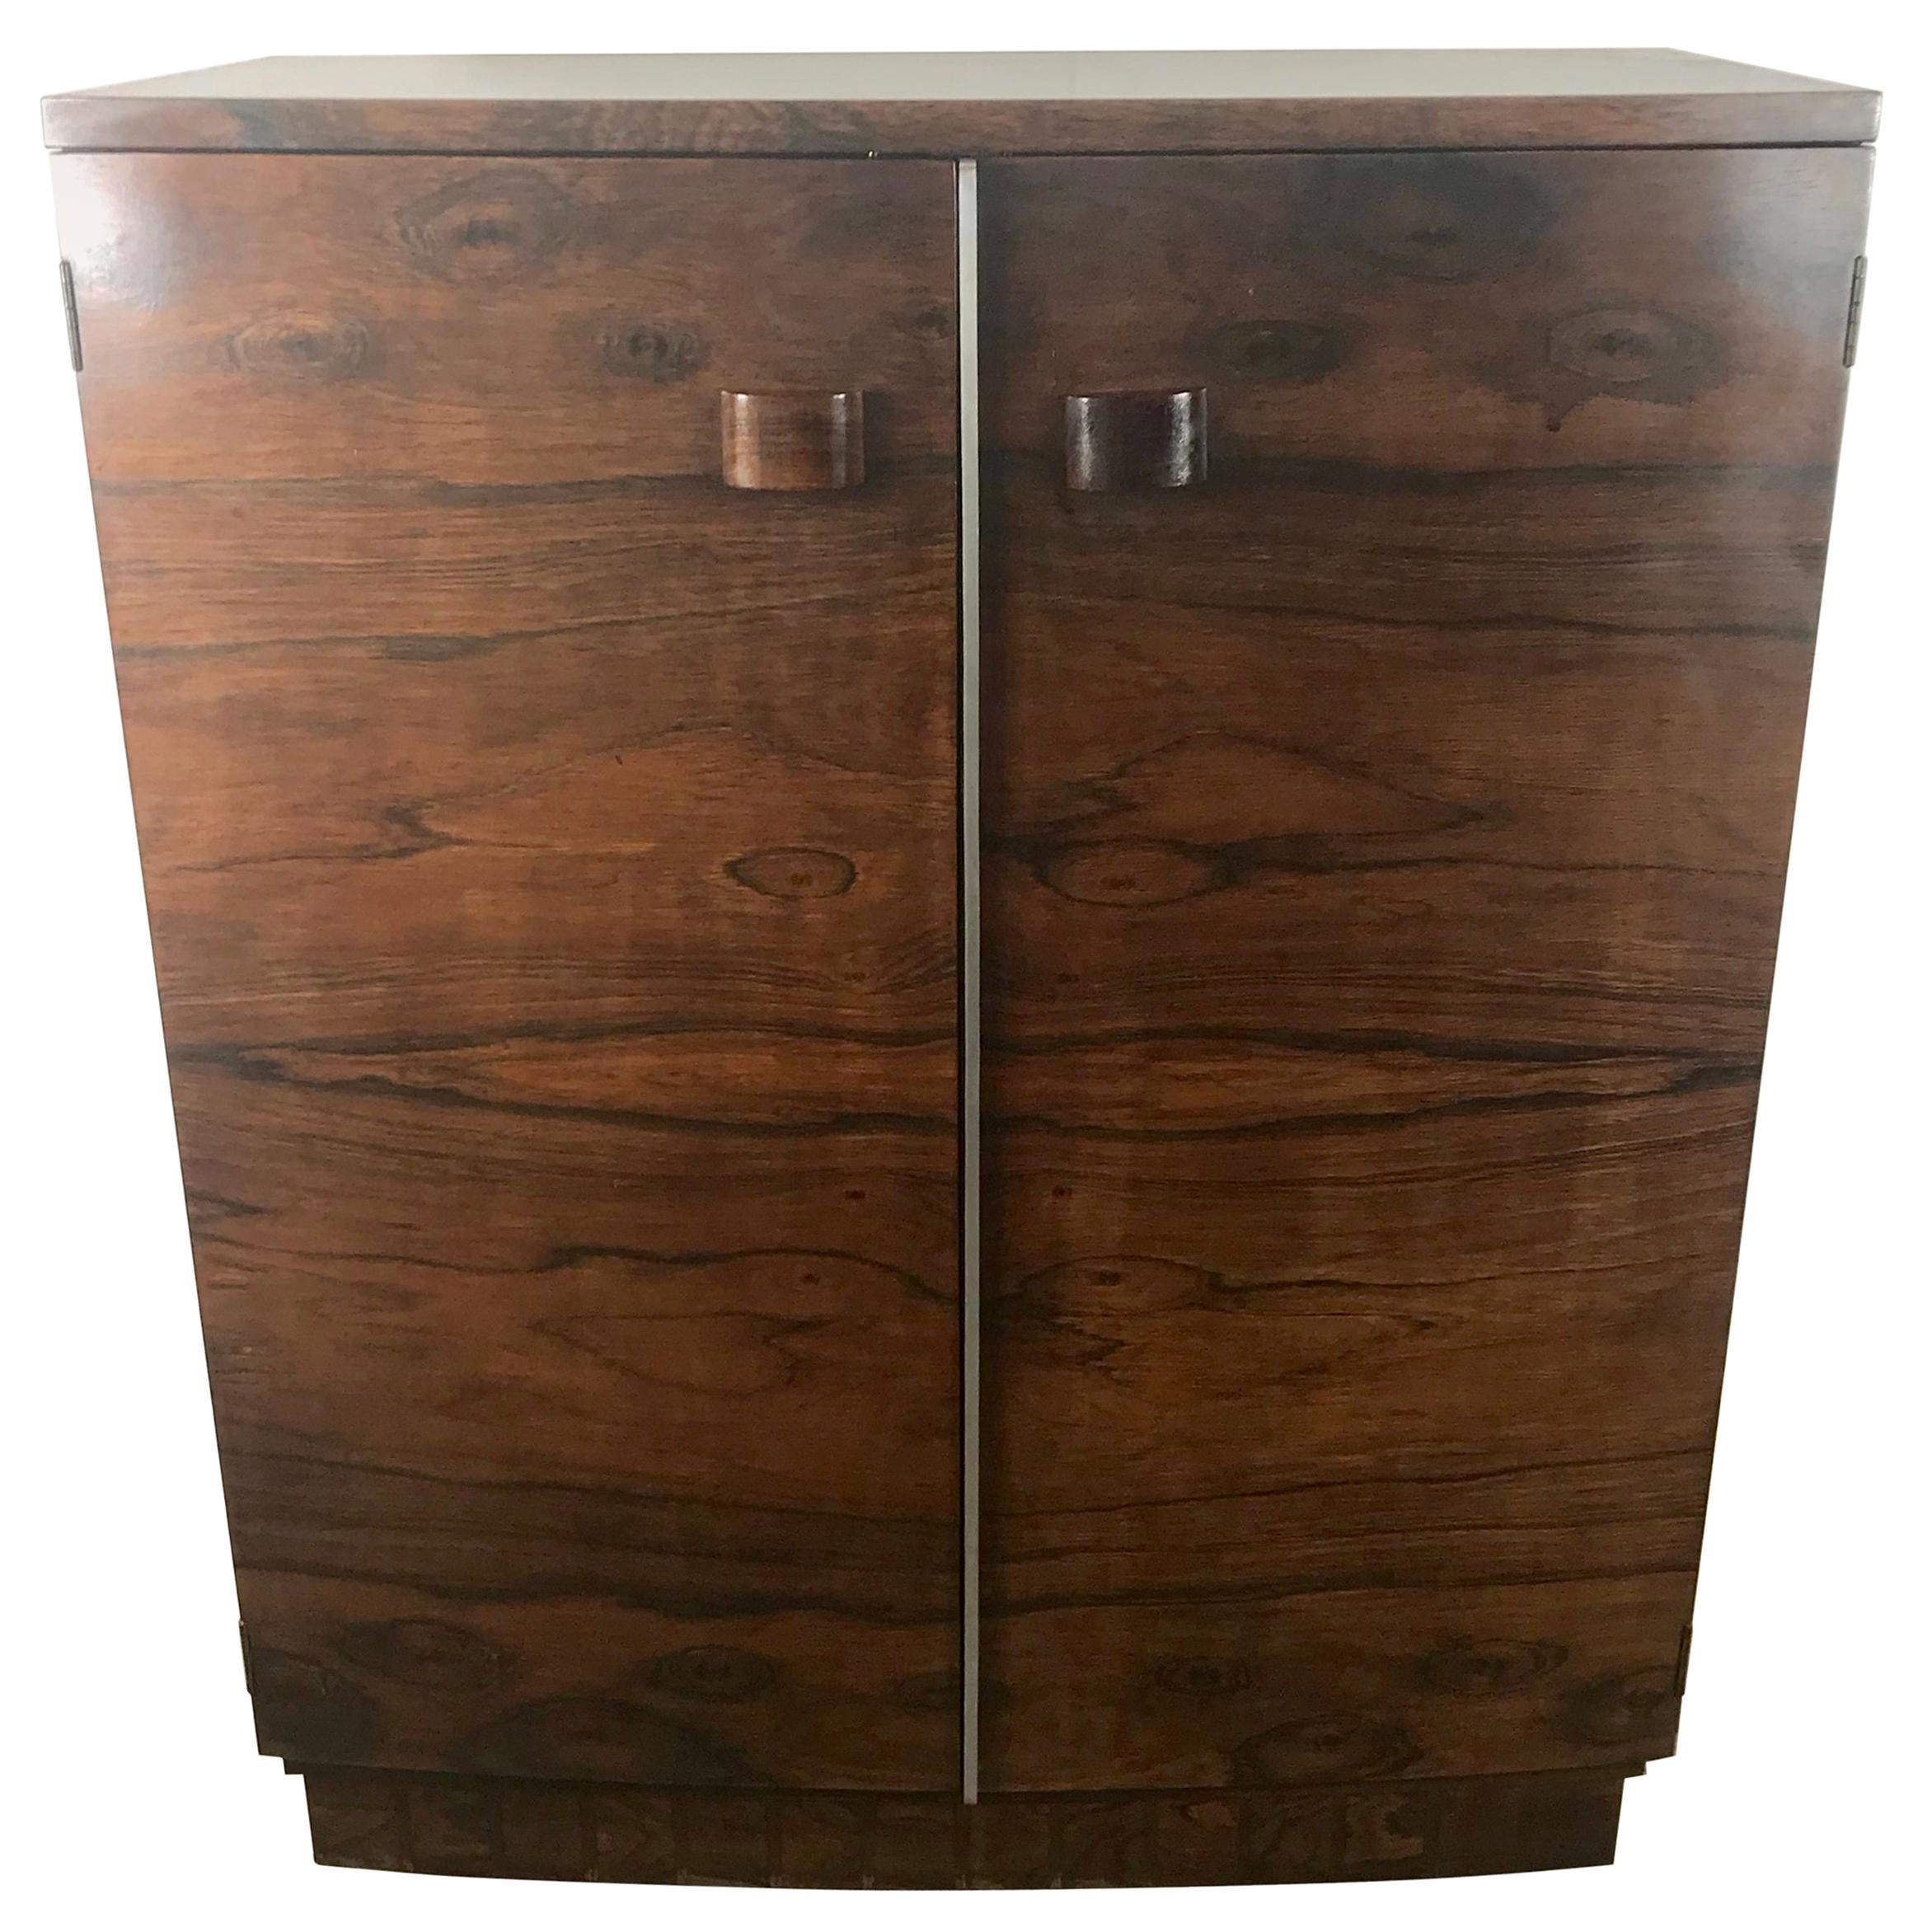 1930s Art Deco Brazilian Rosewood Chest Designed by Gilbert Rohde